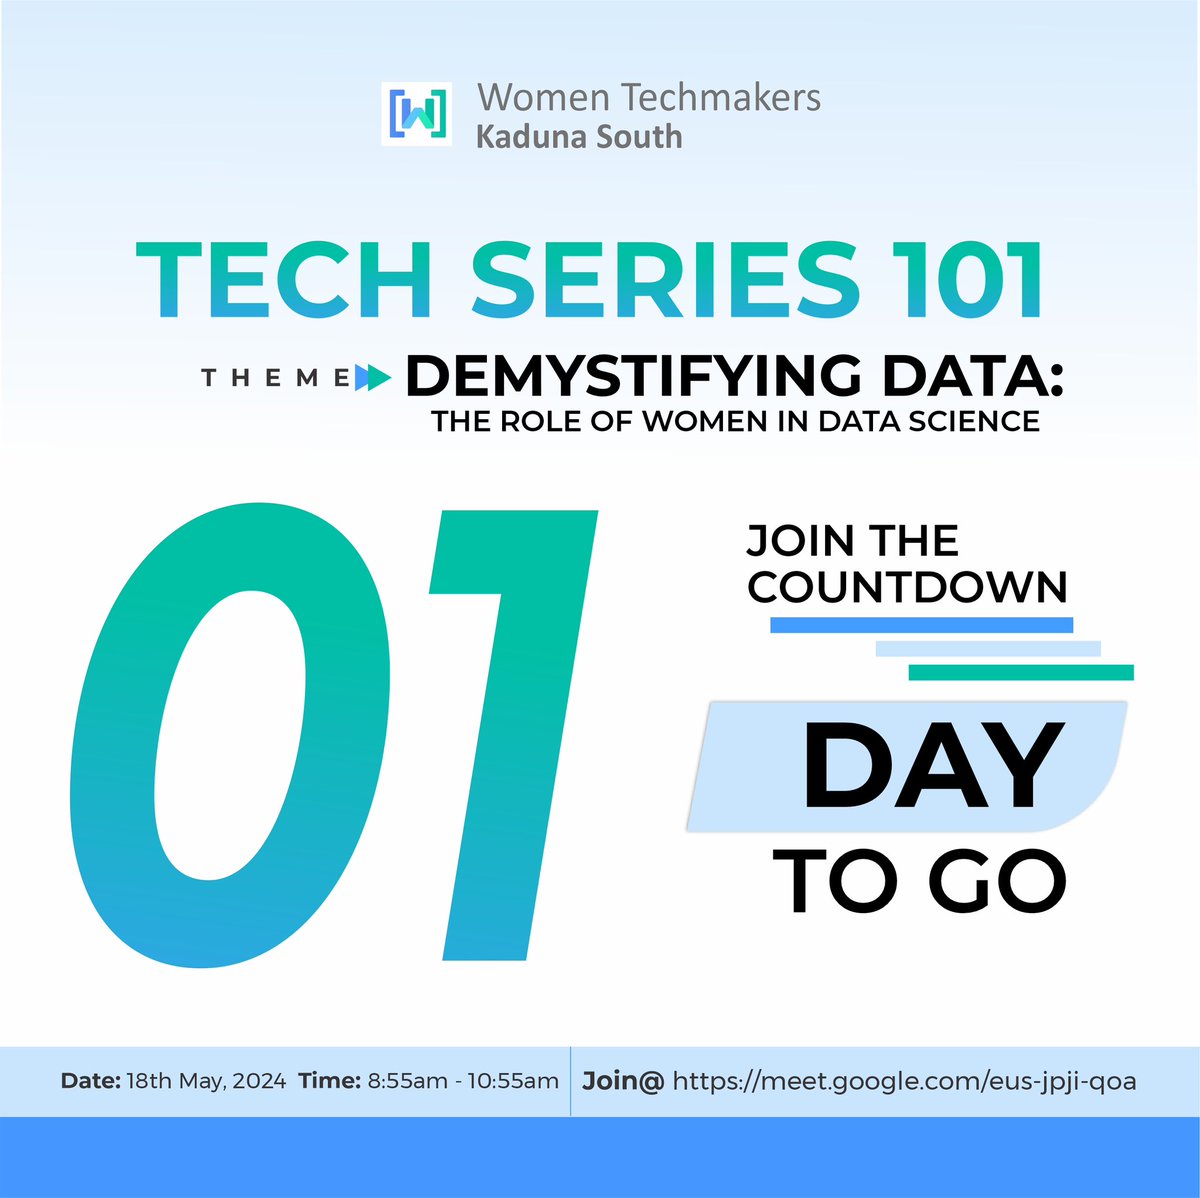 We are excited to remind you that our upcoming event is only eight days away , We hope that you have
marked your calendar for this occasion, as we are looking forward to a great event 

**#WomenTechmakers #KadunaSouth
#TechSeries101 #DataScience
#WomenInSTEM**